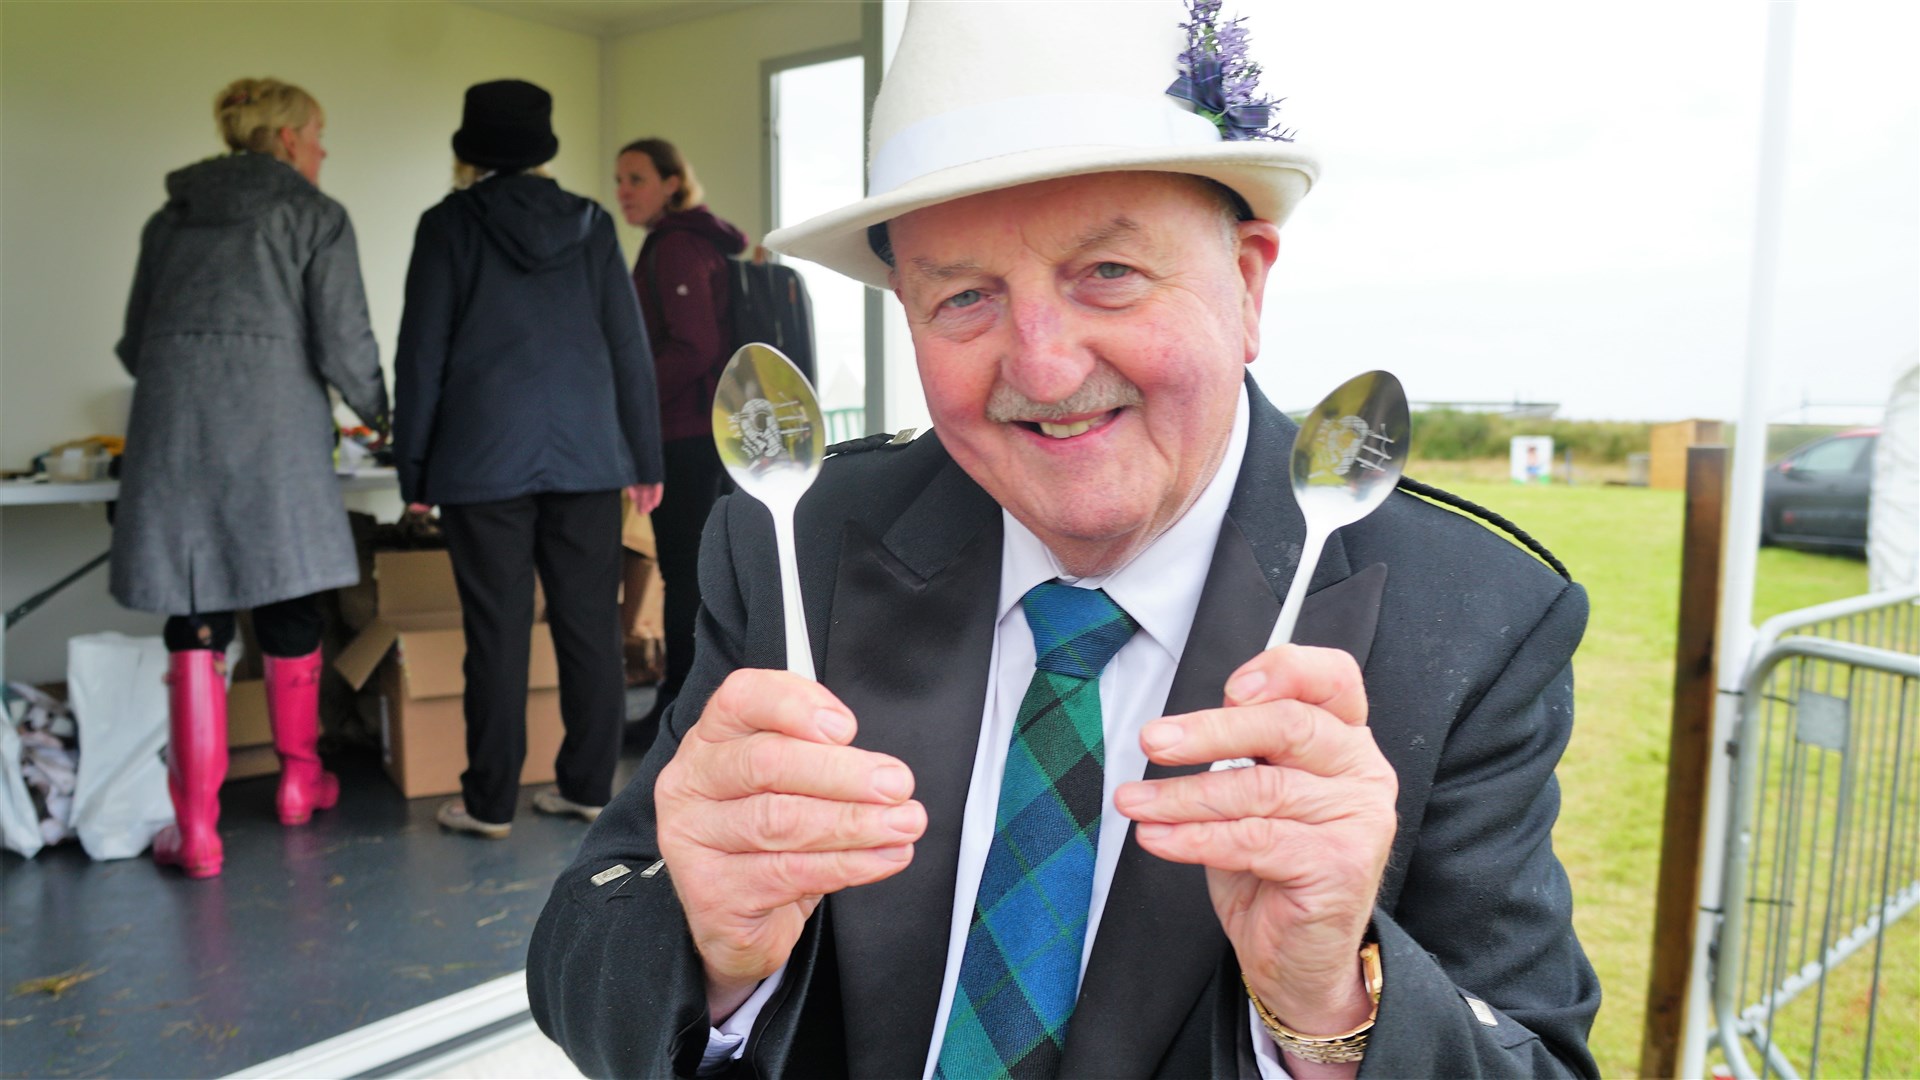 Compere at the event Willie Mackay was delighted to receive an engraved set of silver spoons. Willie is well known for his spoon playing skills and played a tune minutes after receiving his gift. Picture: DGS